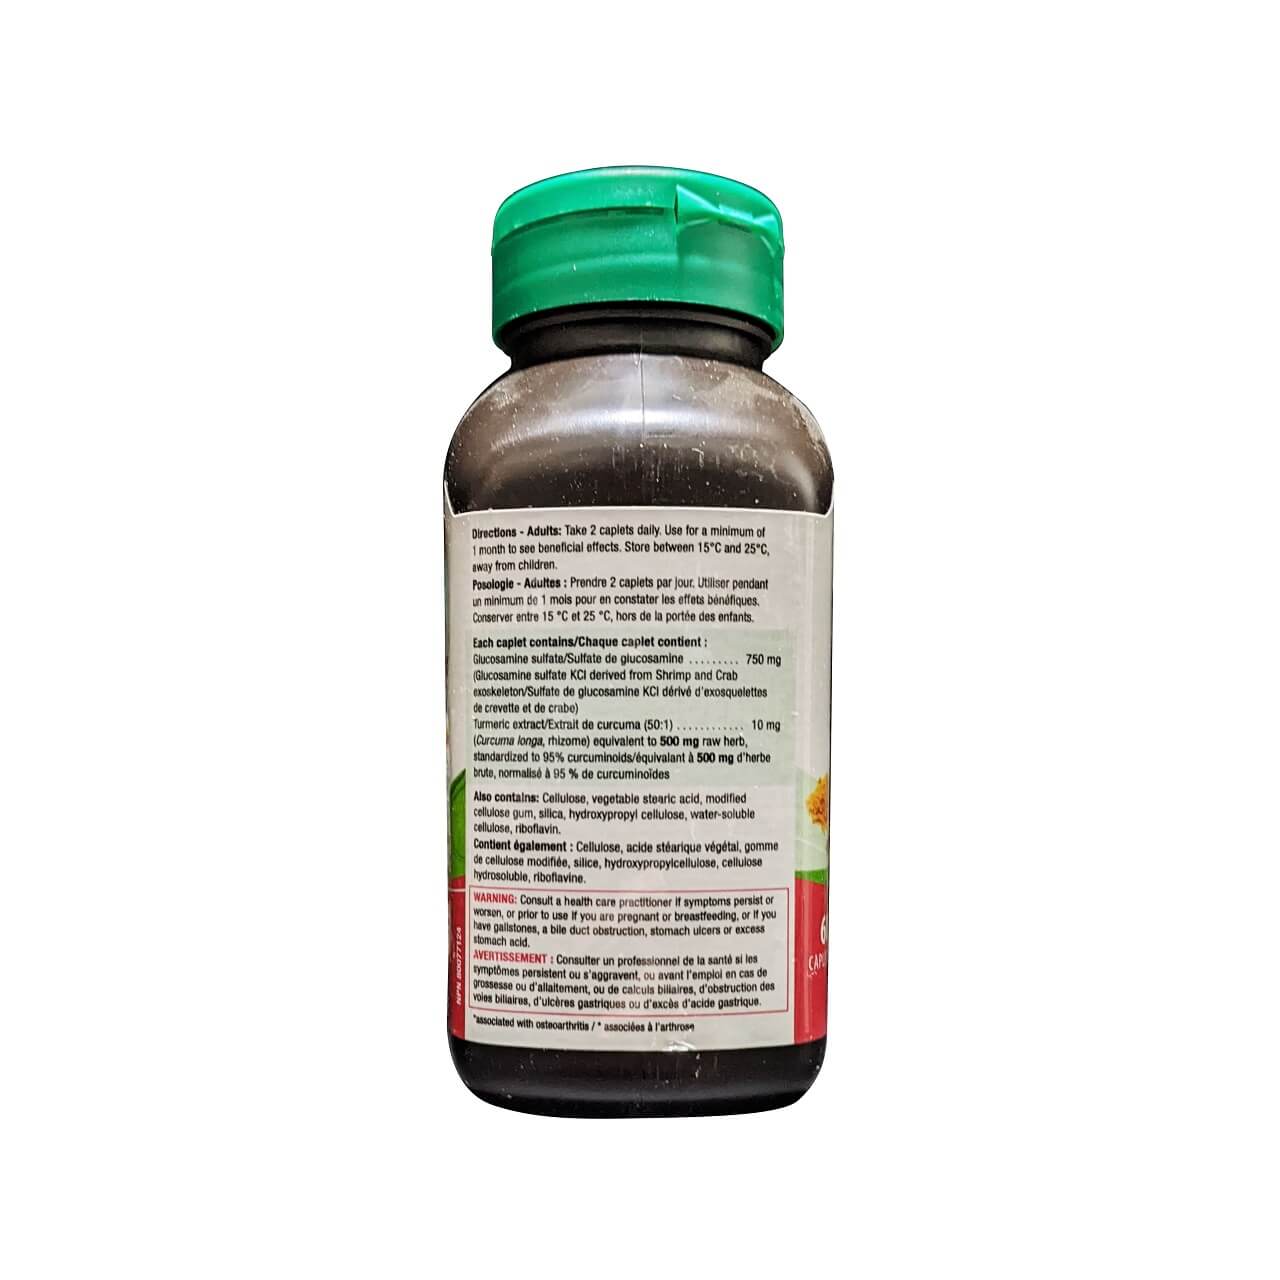 Directions, Ingredients, Warnings for Jamieson Glucosamine Turmeric Complex (60 caplets)